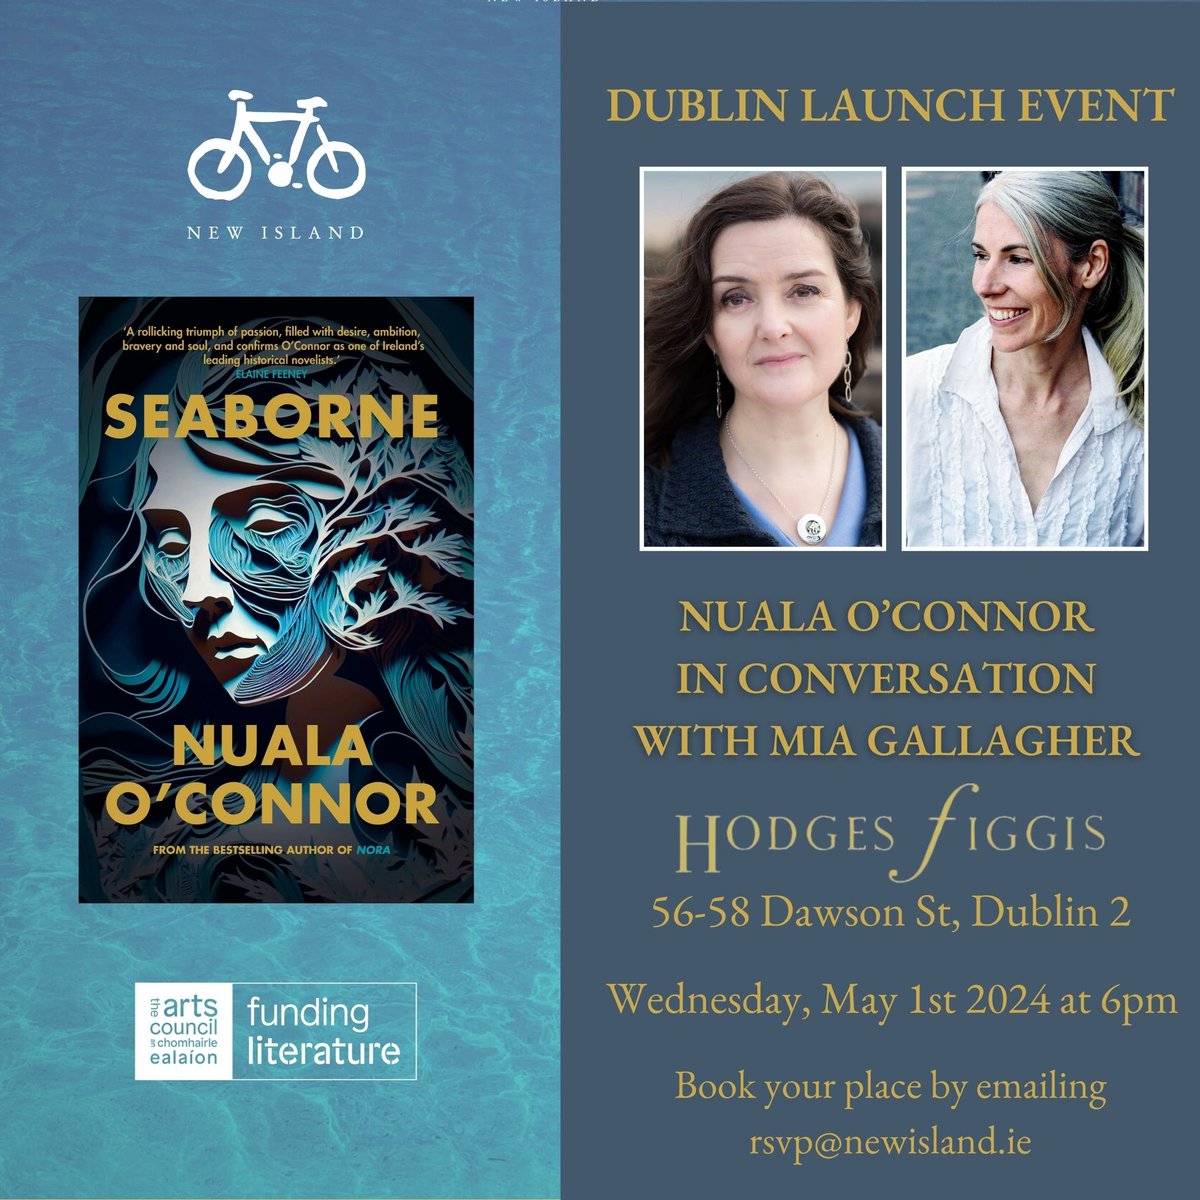 Dubs!! Join us for the launch of Seaborne in beautiful @Hodges_Figgis Mia Gallagher - writer/actress - will do the honours. I can't wait! 1st May, 6pm. Please RSVP as outlined in the image. #seabornenovel #AnneBonny #hodgesfiggis #booklaunch #miagallagher